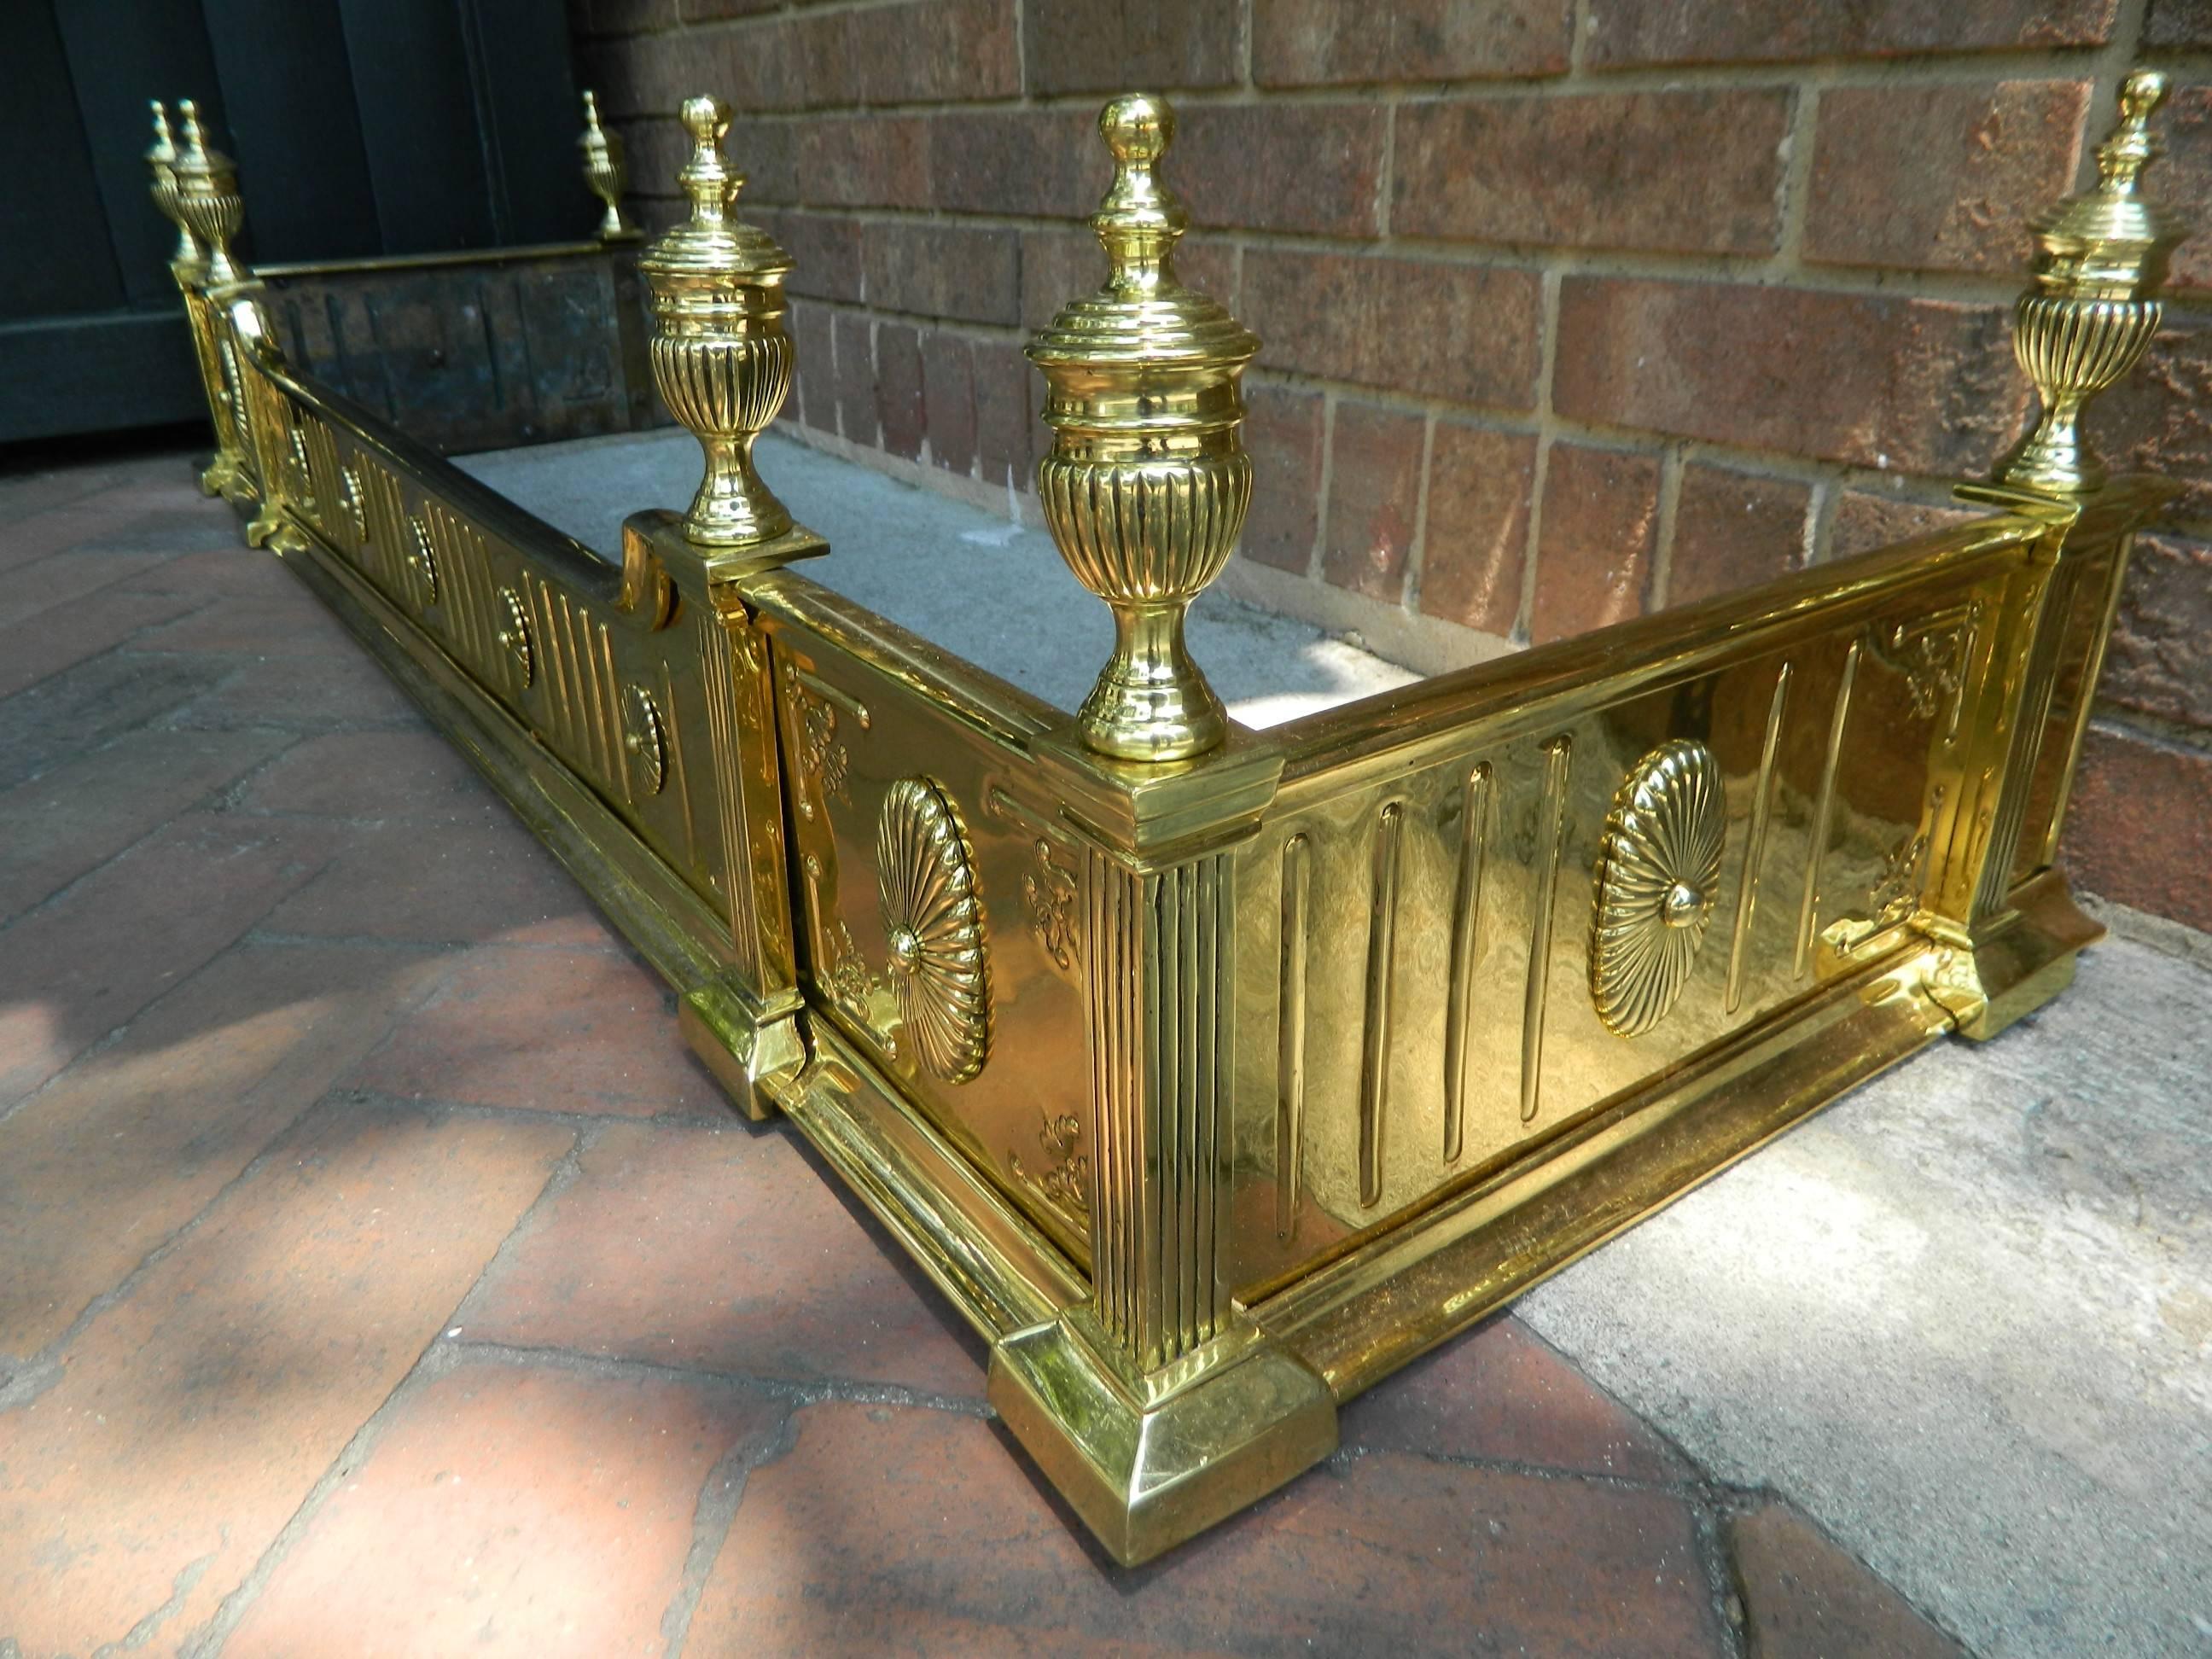 English polished solid brass fireplace fender adorned with finials, 19th century. Professionally cleaned and polished.